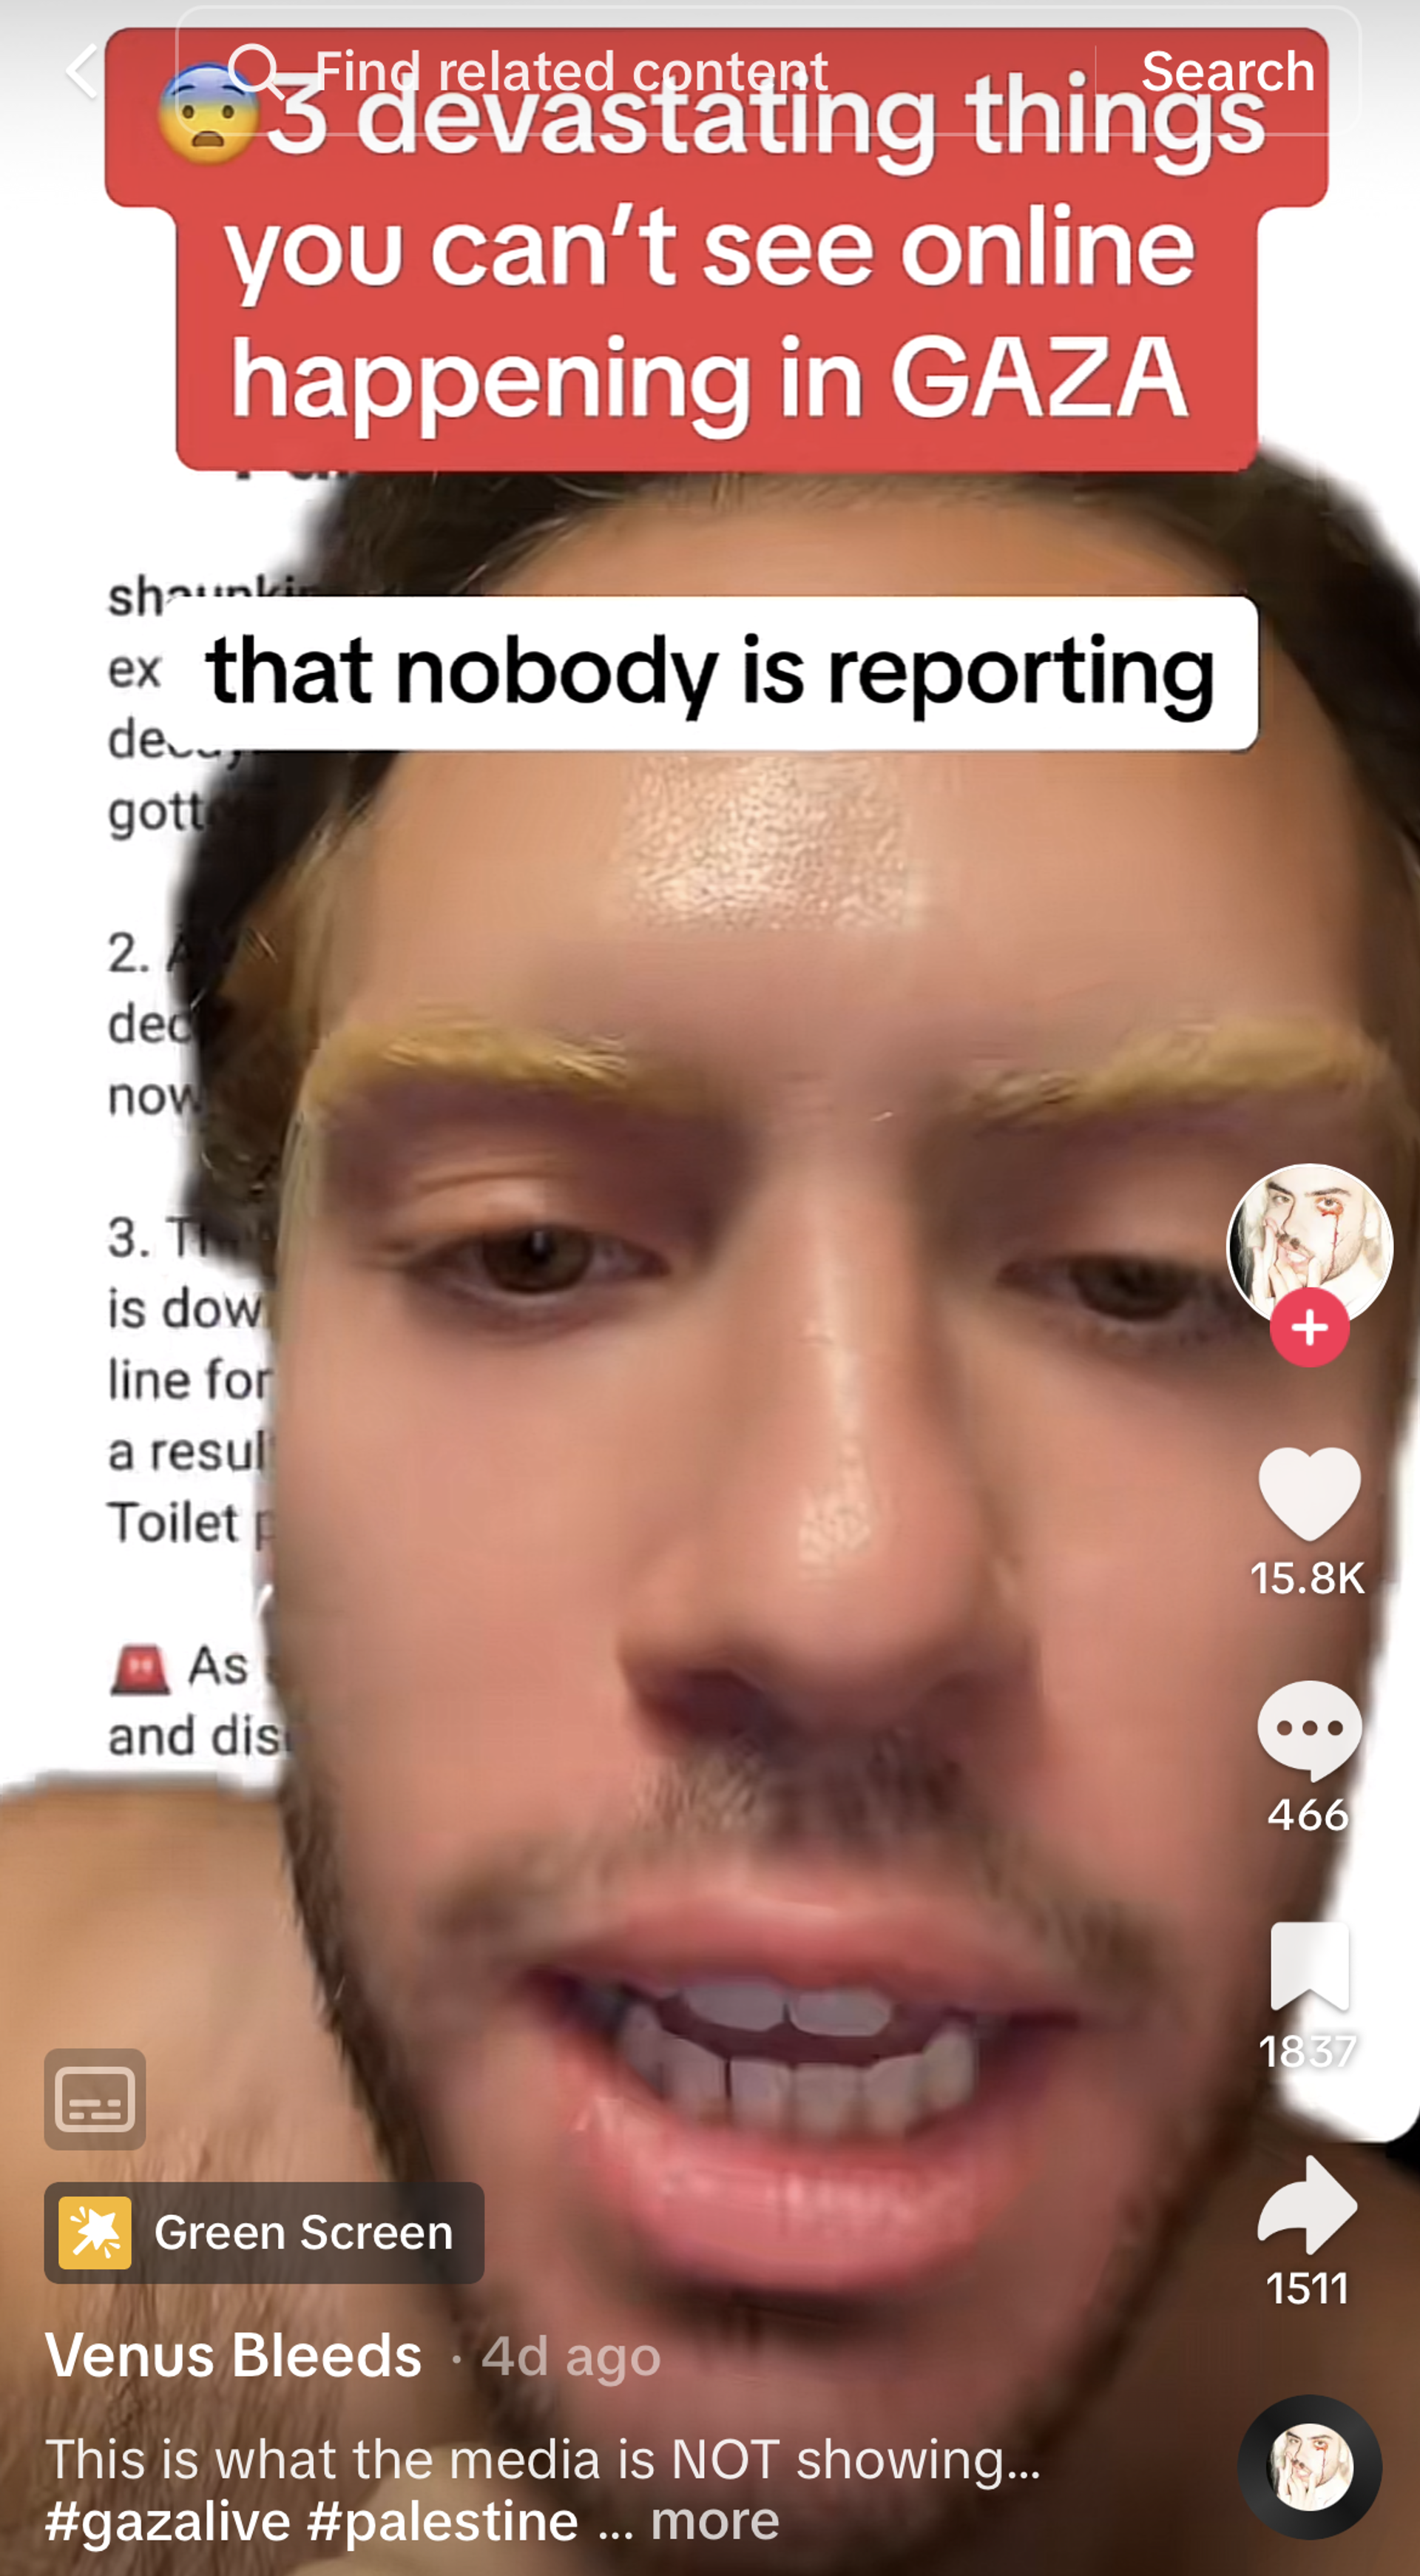 A screenshot of a TikTok stating "3 devastating things you can't see online happening in GAZA / that nobody is reporting"